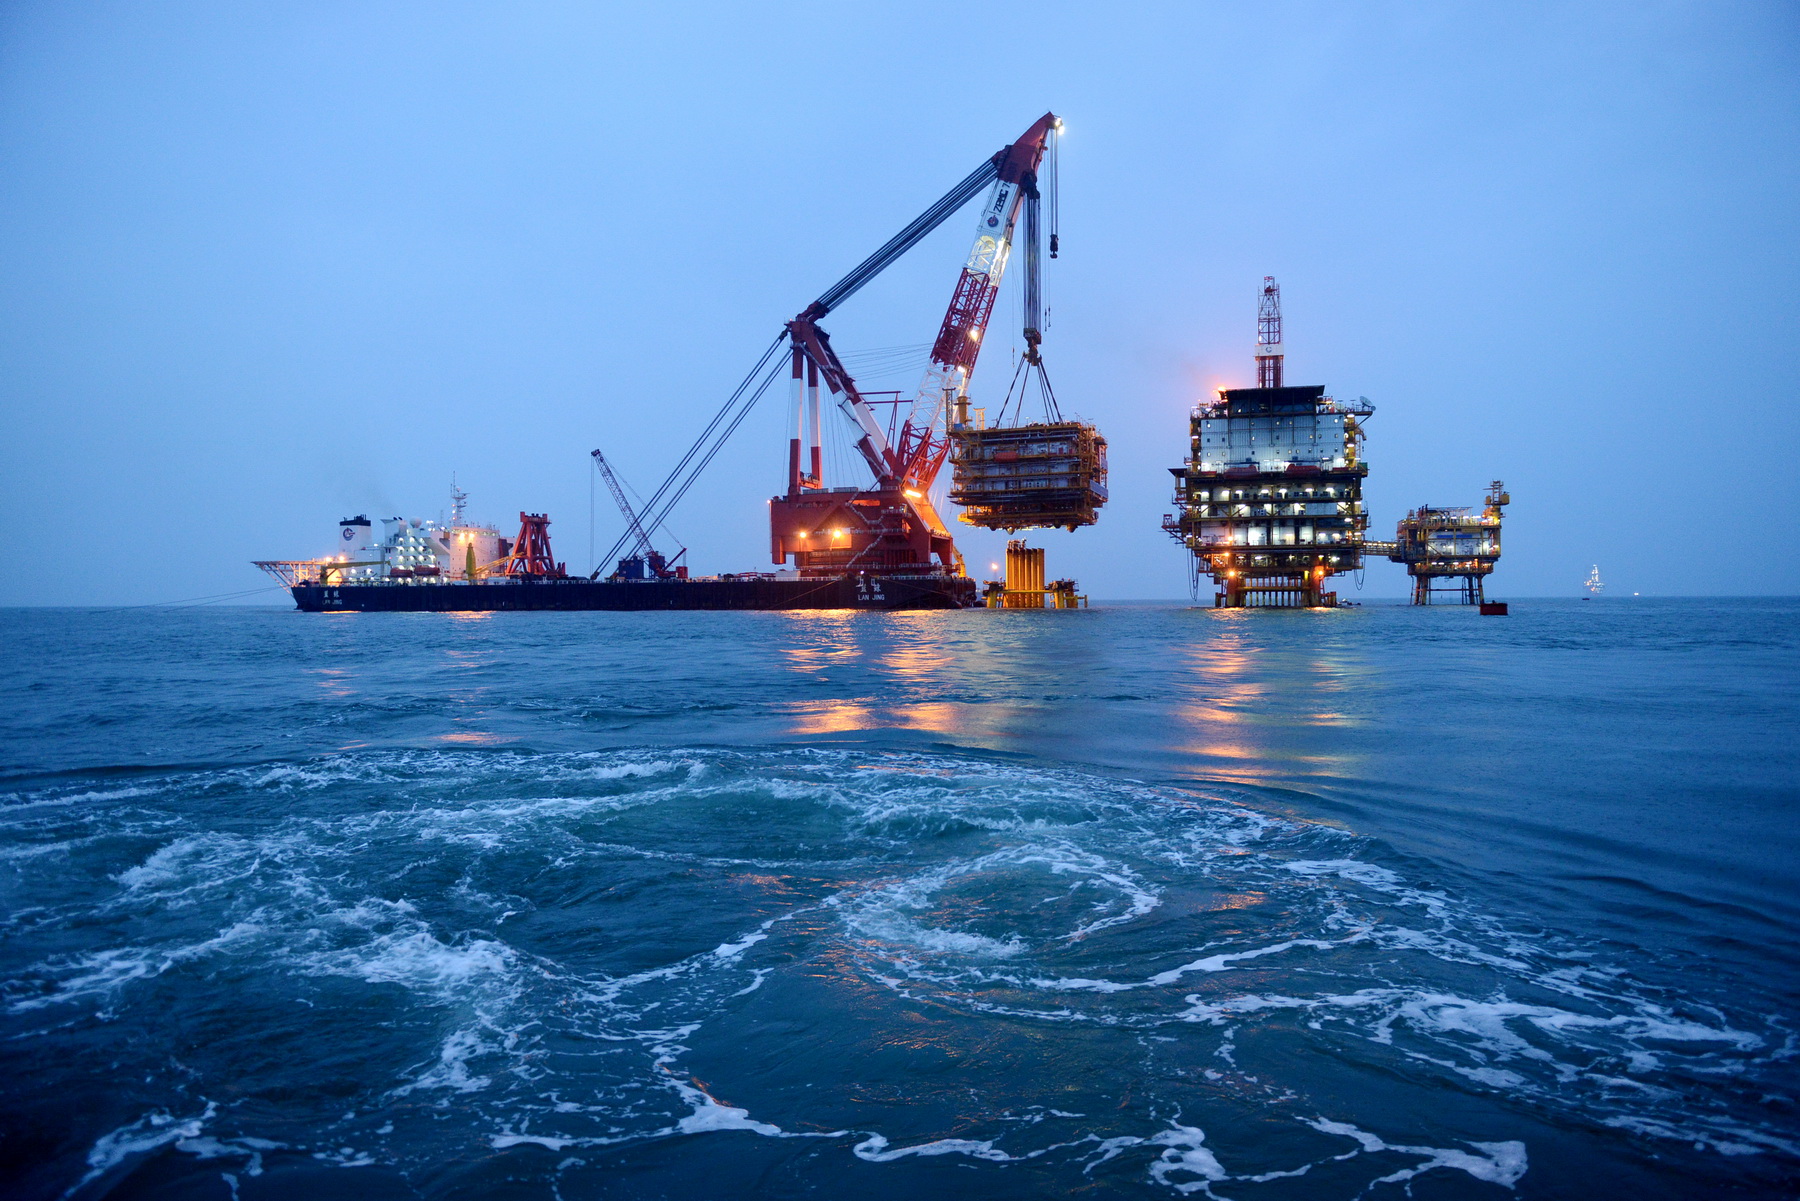 Application of glass fiber and other composite materials in offshore platforms